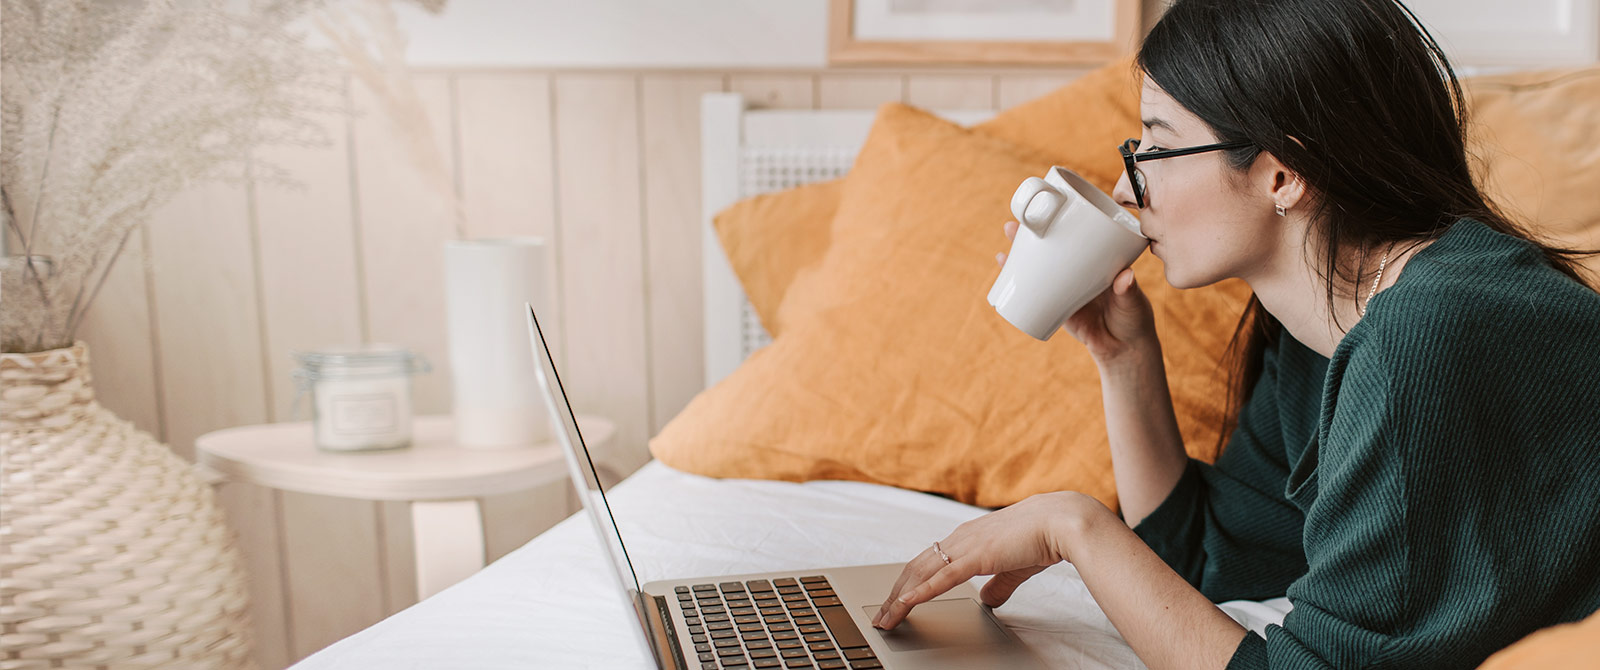 Woman drinking coffee on her computer